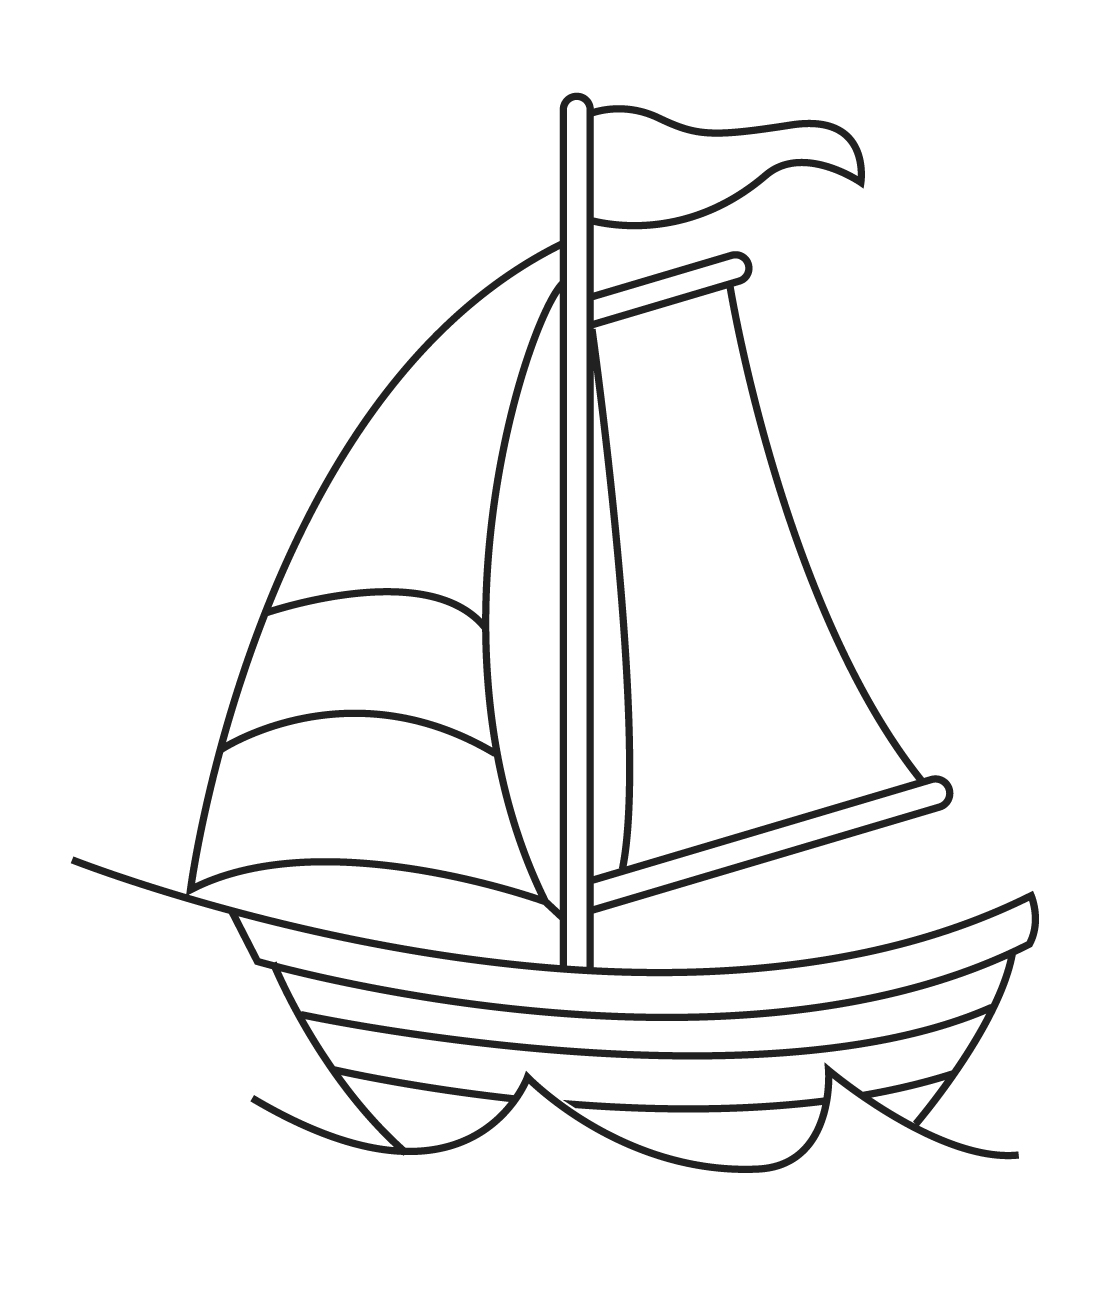 Simple Sailboat Drawing - Free Clipart Images